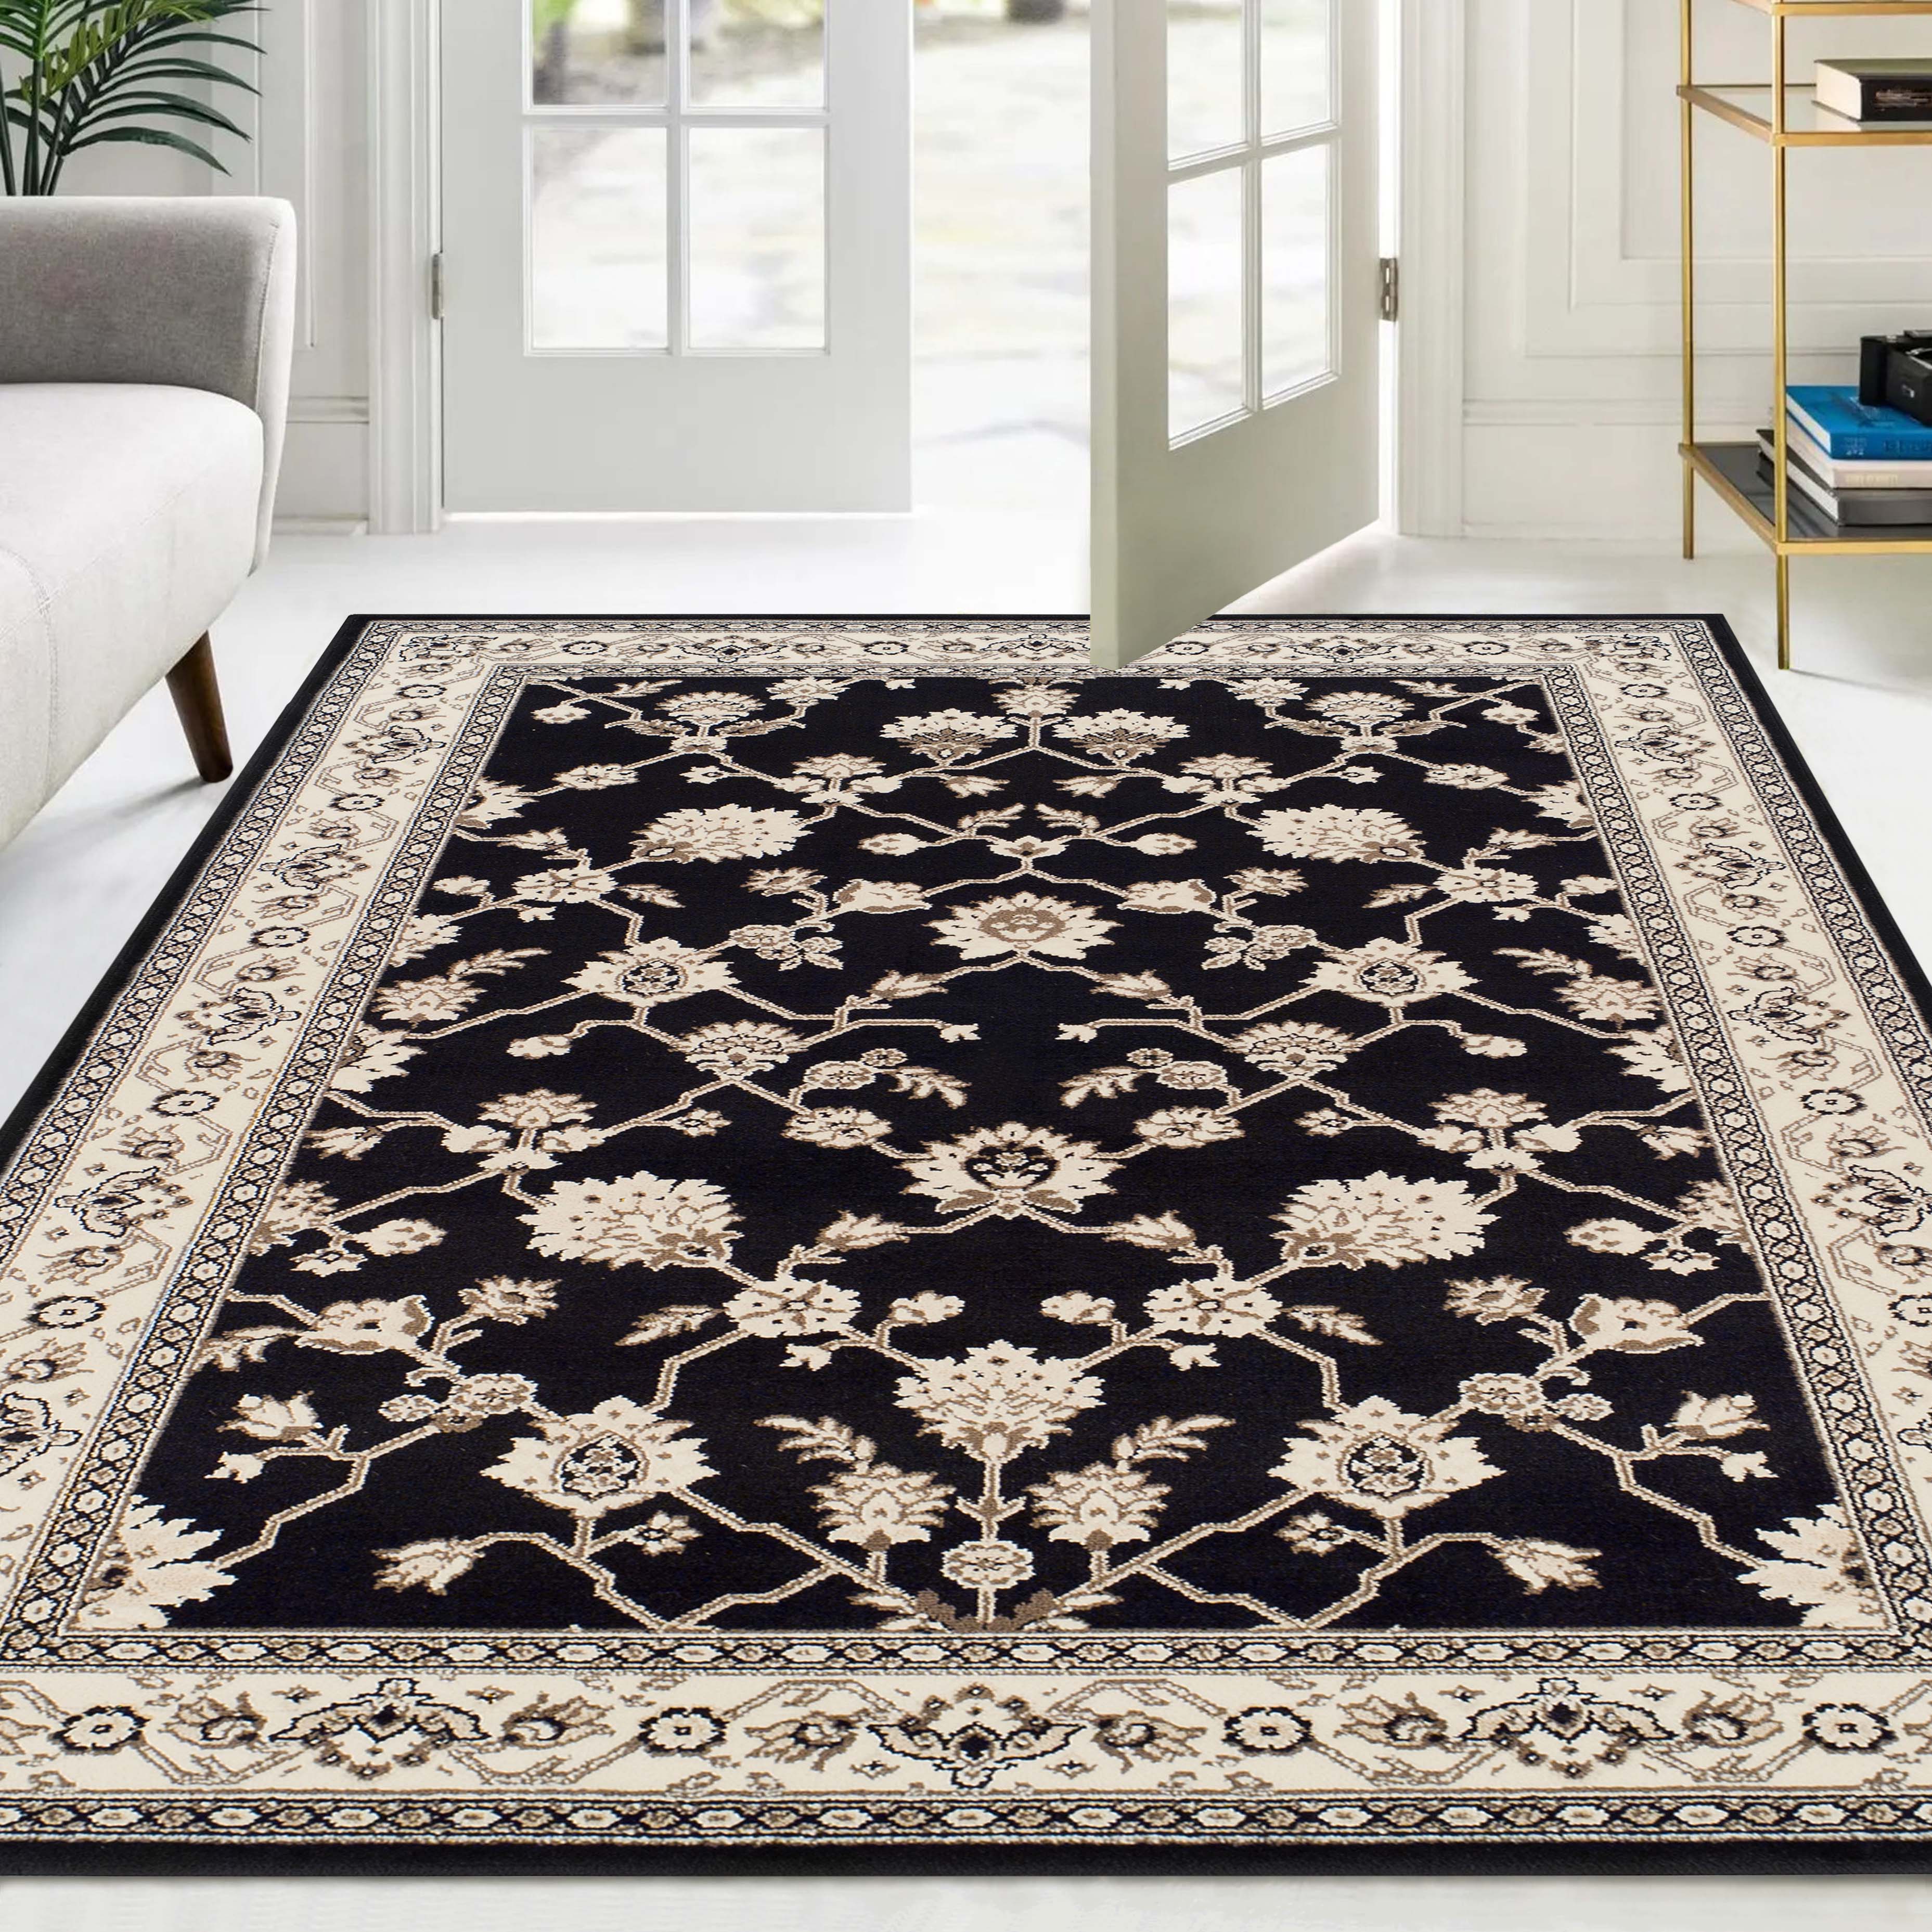 Kingfield Traditional Floral Indoor Area Rug, 8' x 10', Black - image 1 of 5